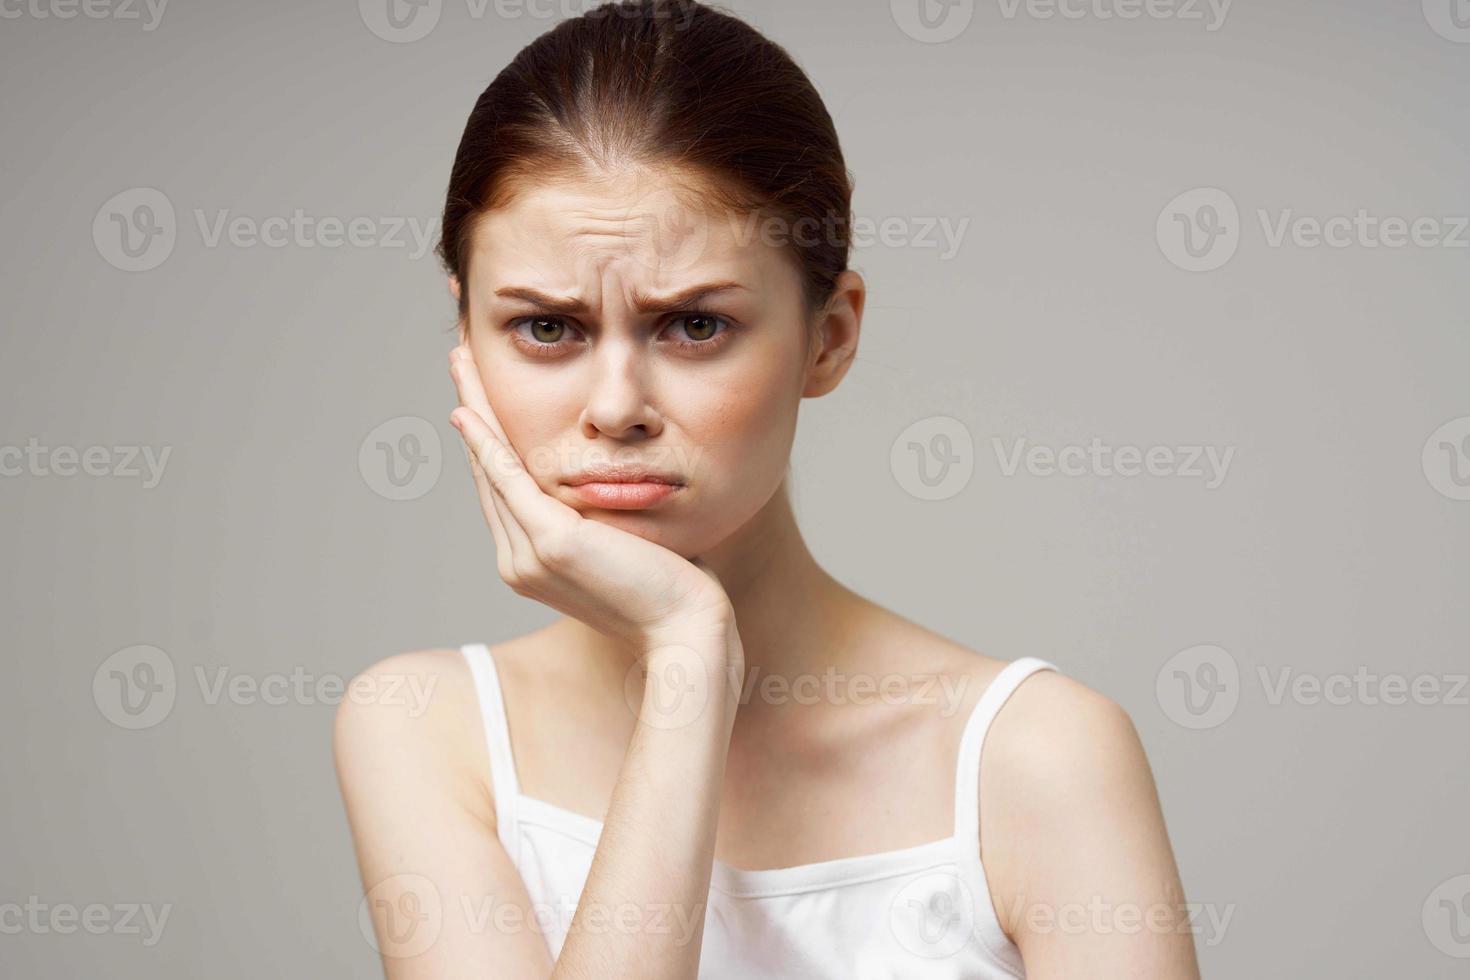 disgruntled woman dentistry dental pain close-up light background photo